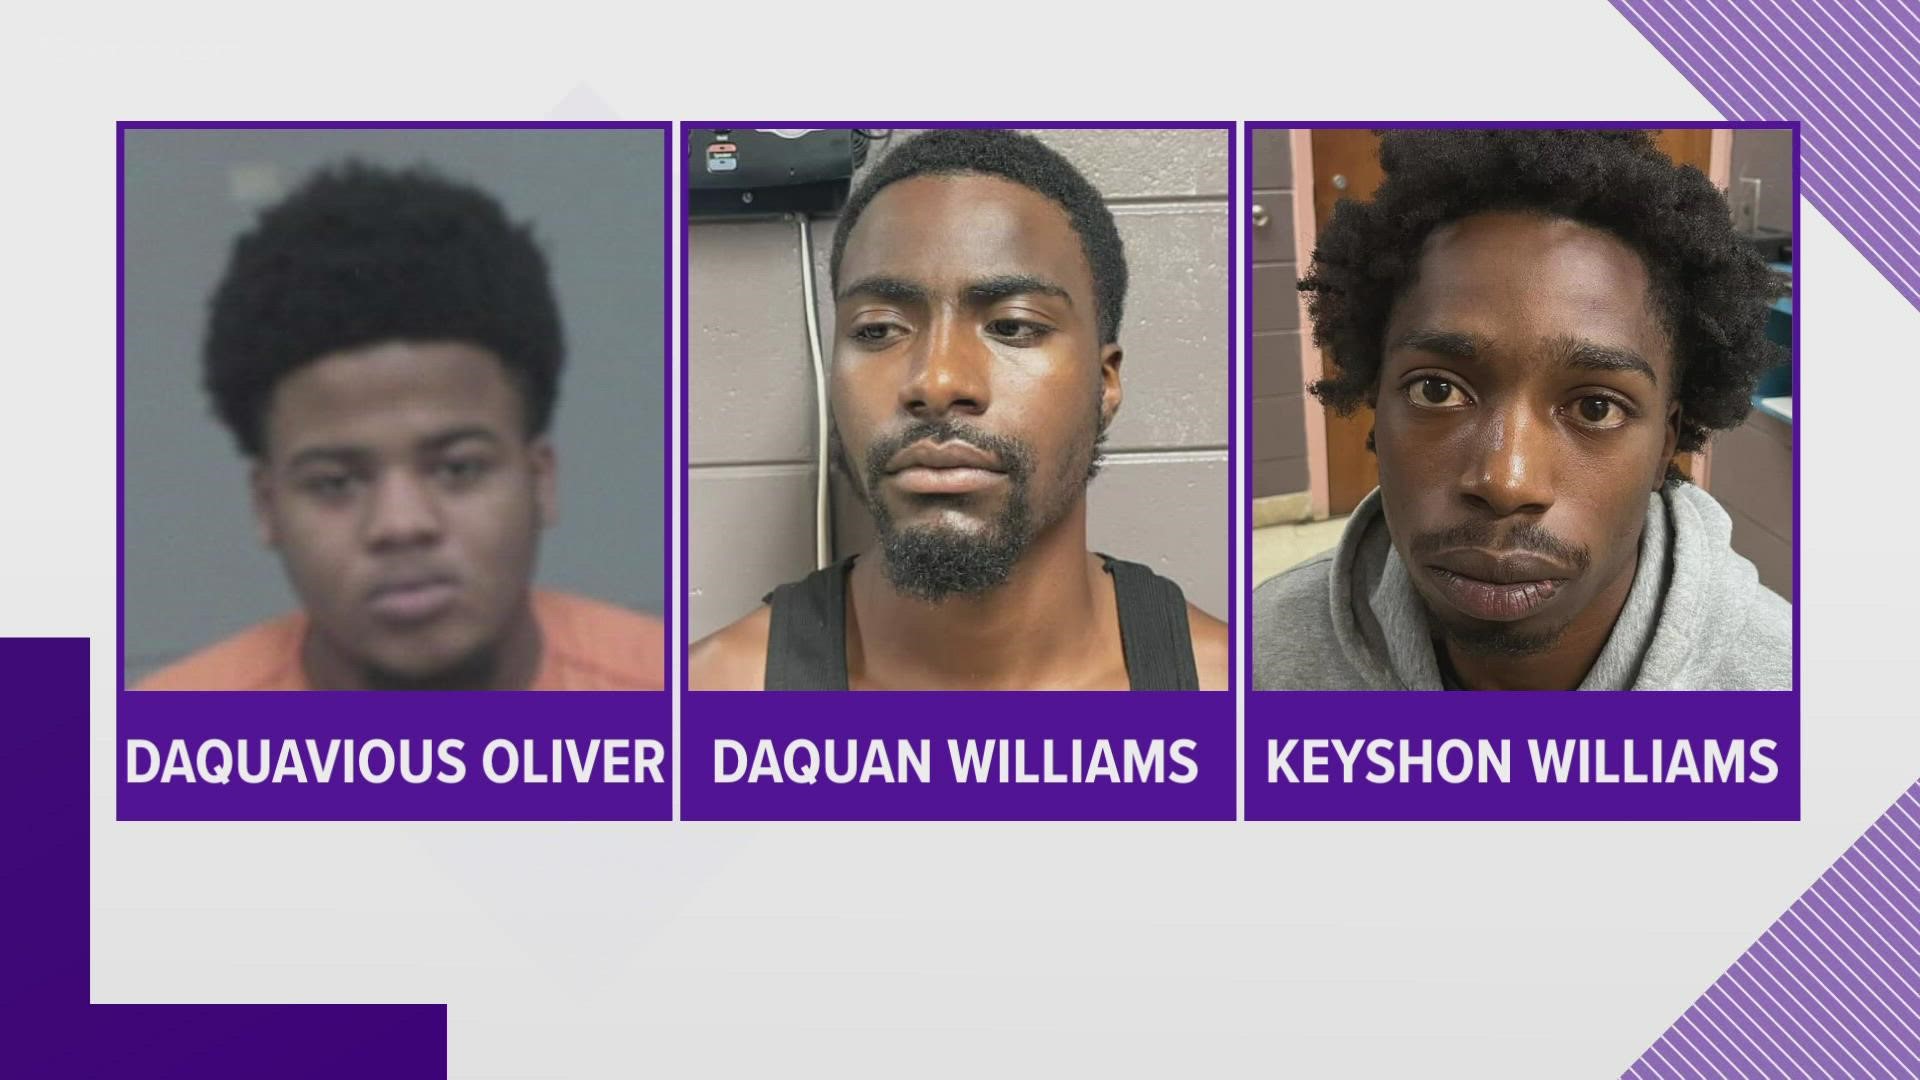 Daquavious Oliver was arrested Monday. Daquan Williams was arrested Sunday morning.